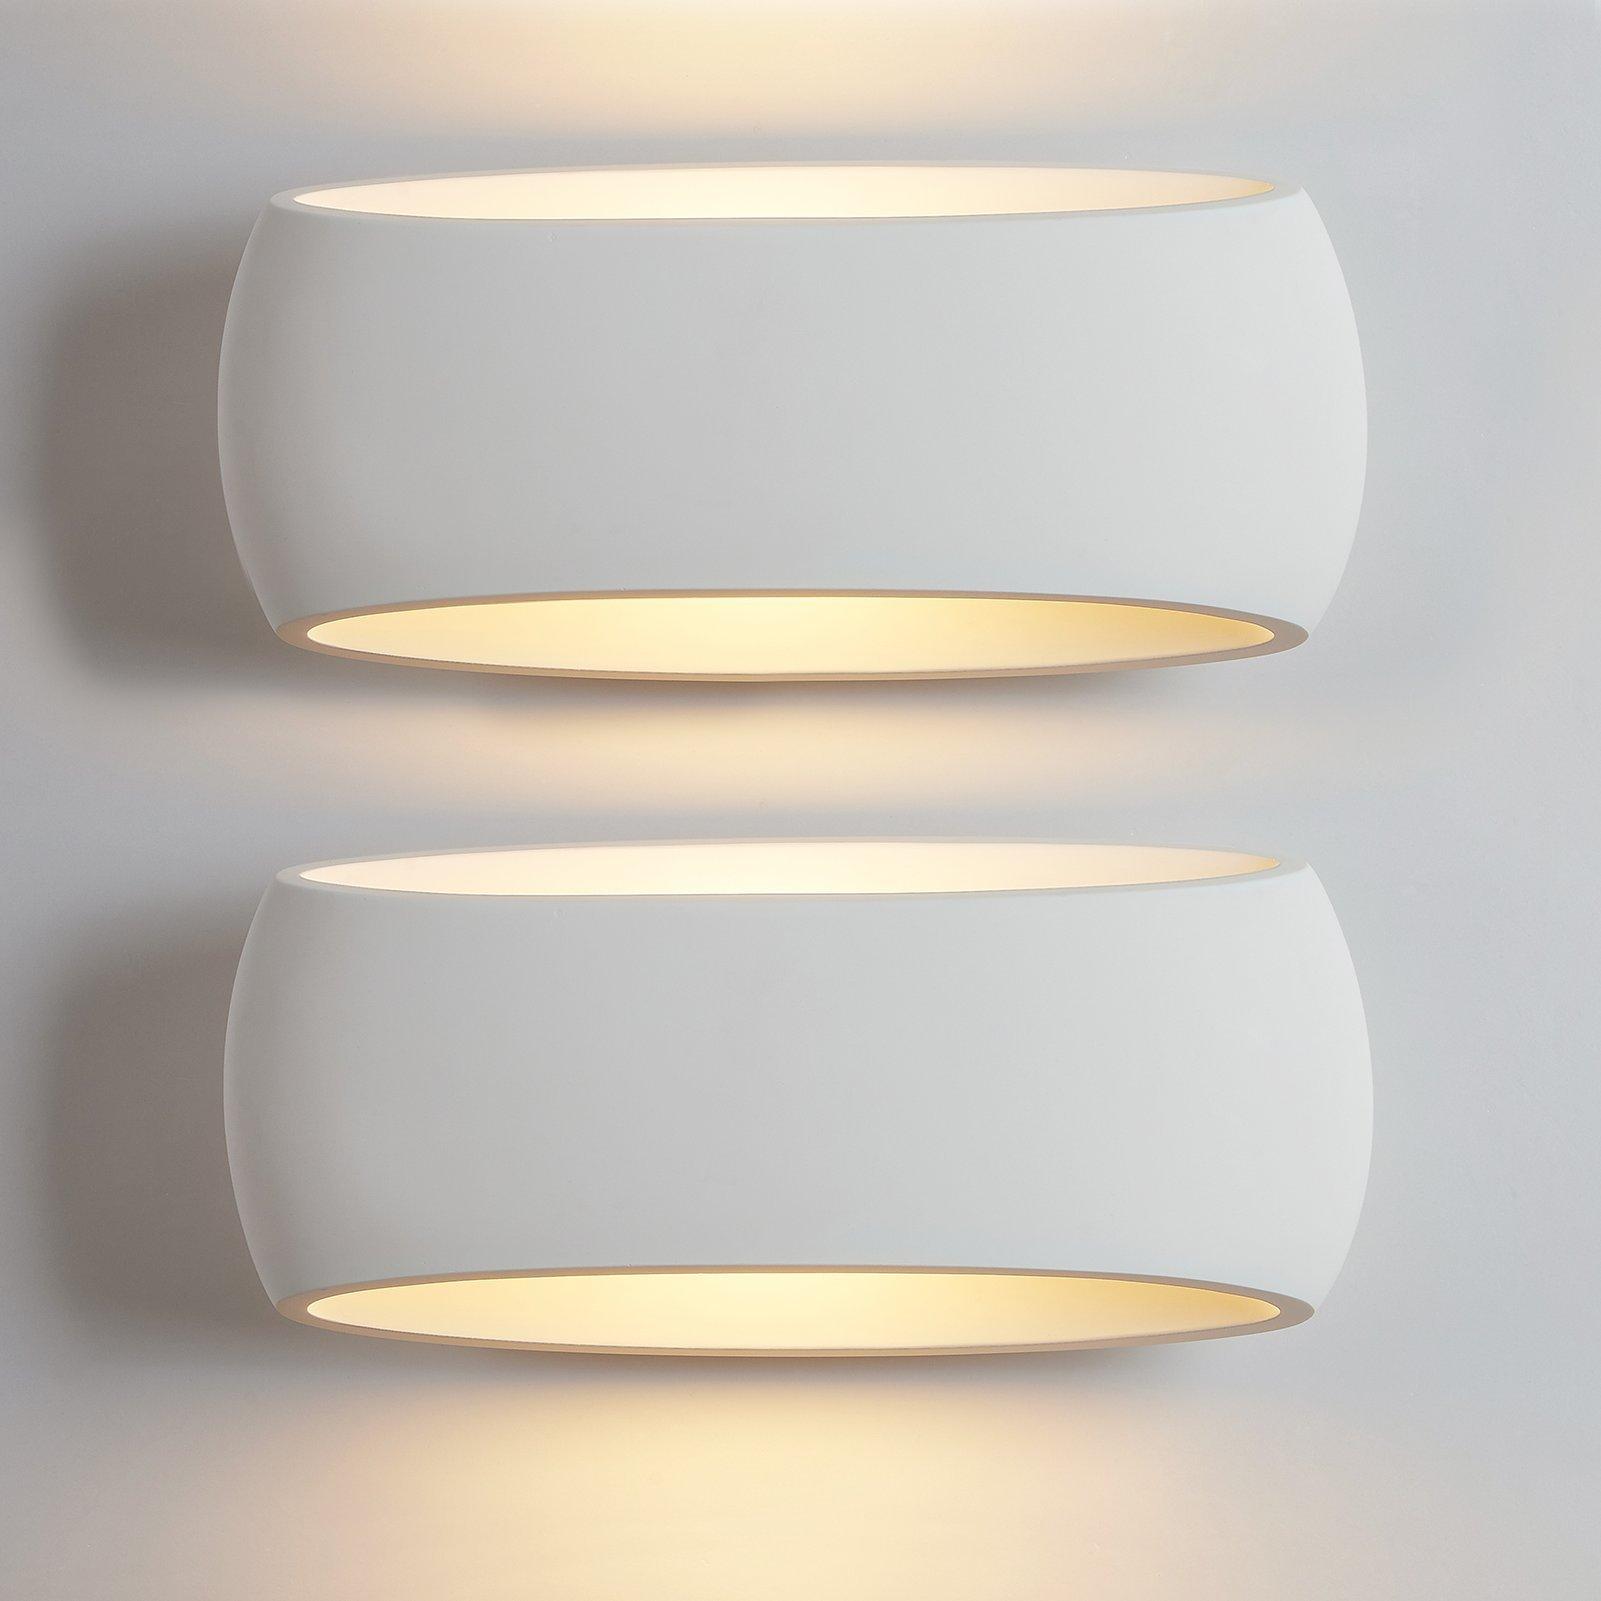 2X Large Wall Sconce Lamp with White Oval Ceramic Shade, Plaster Wall Light